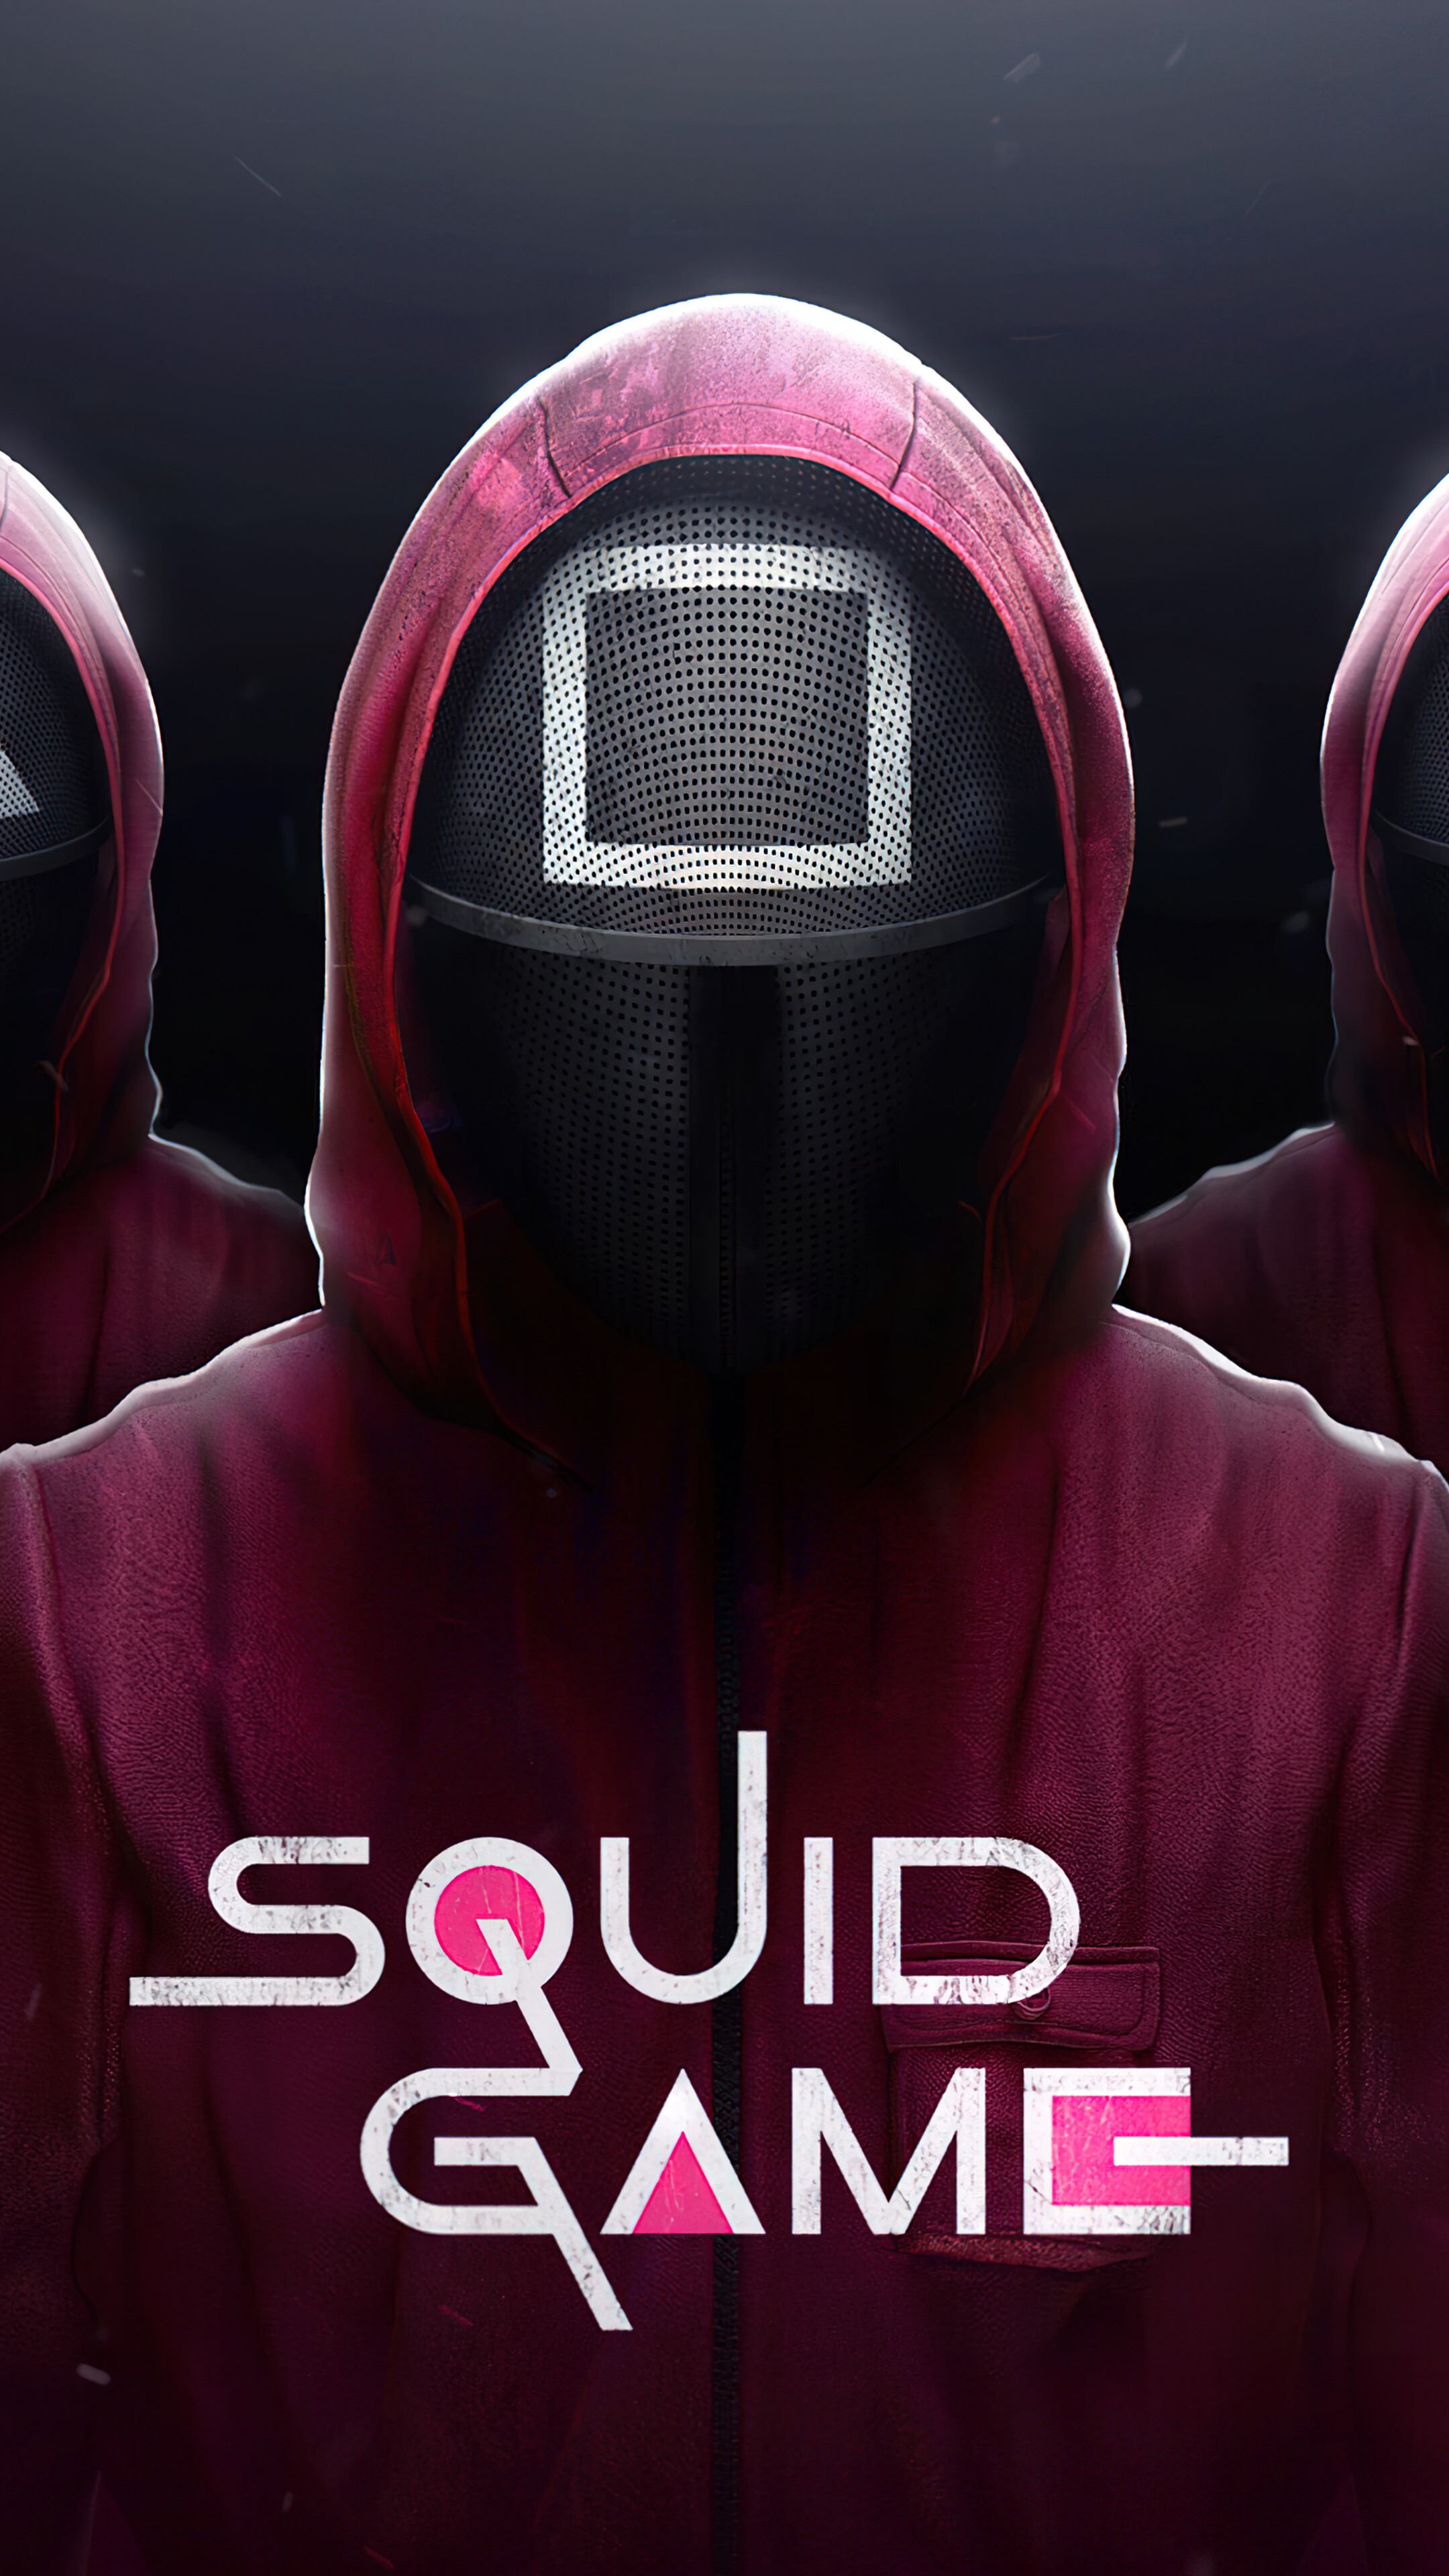 Squid Game: The wealthy elite bet on the players, Netflix's most-watched original series. 2160x3840 4K Wallpaper.